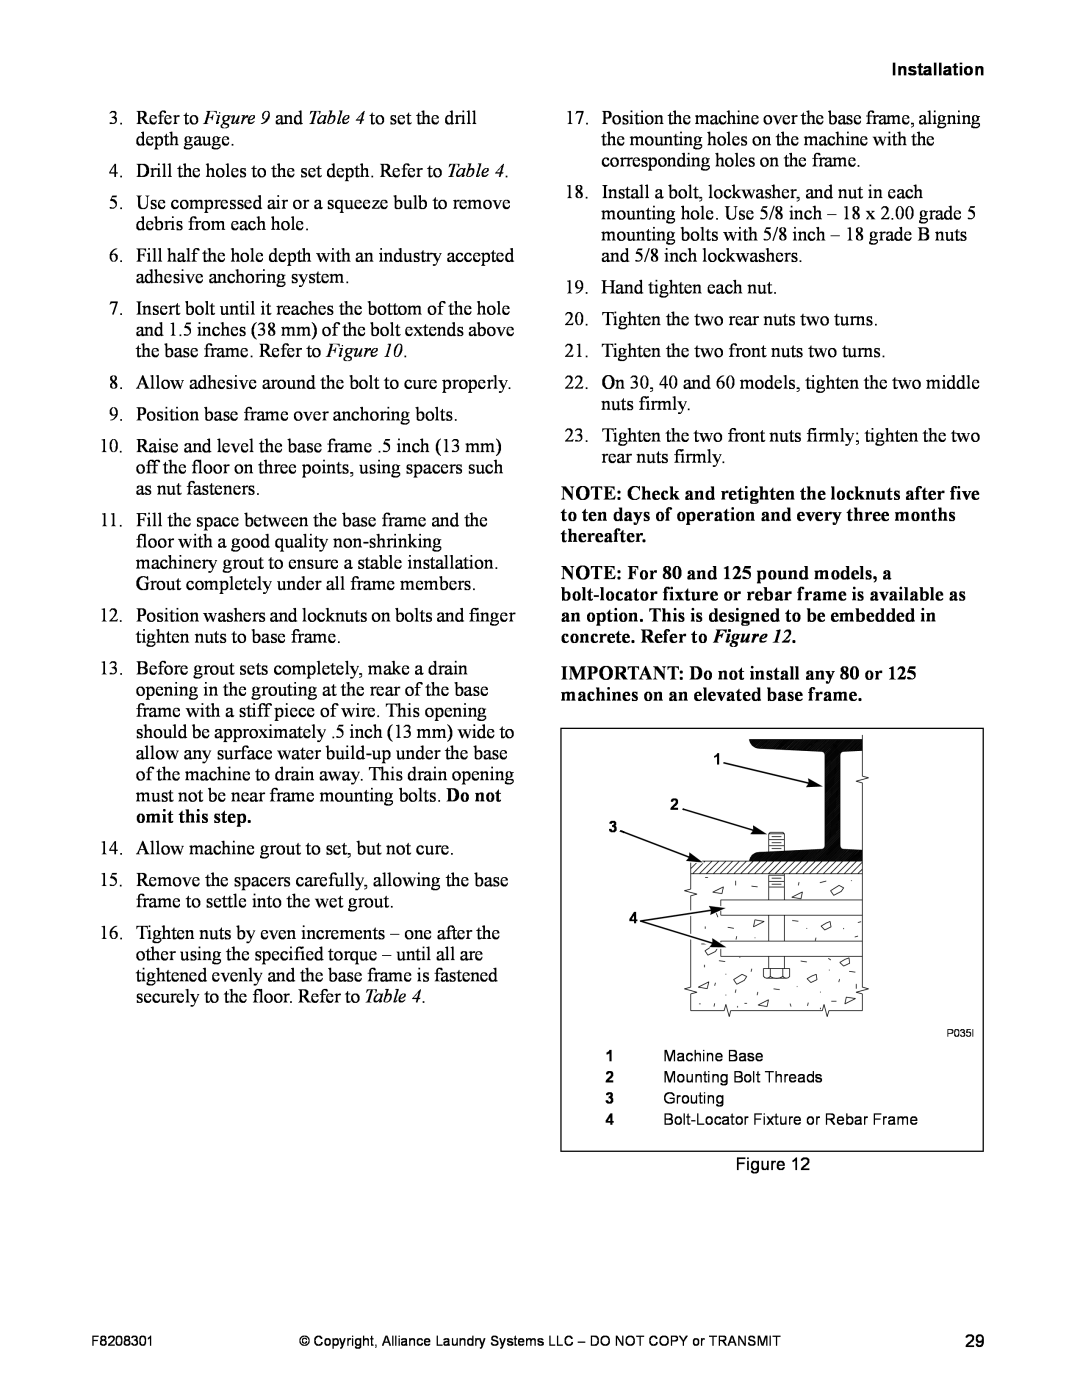 Alliance Laundry Systems CHM1772C manual Refer to and to set the drill depth gauge 